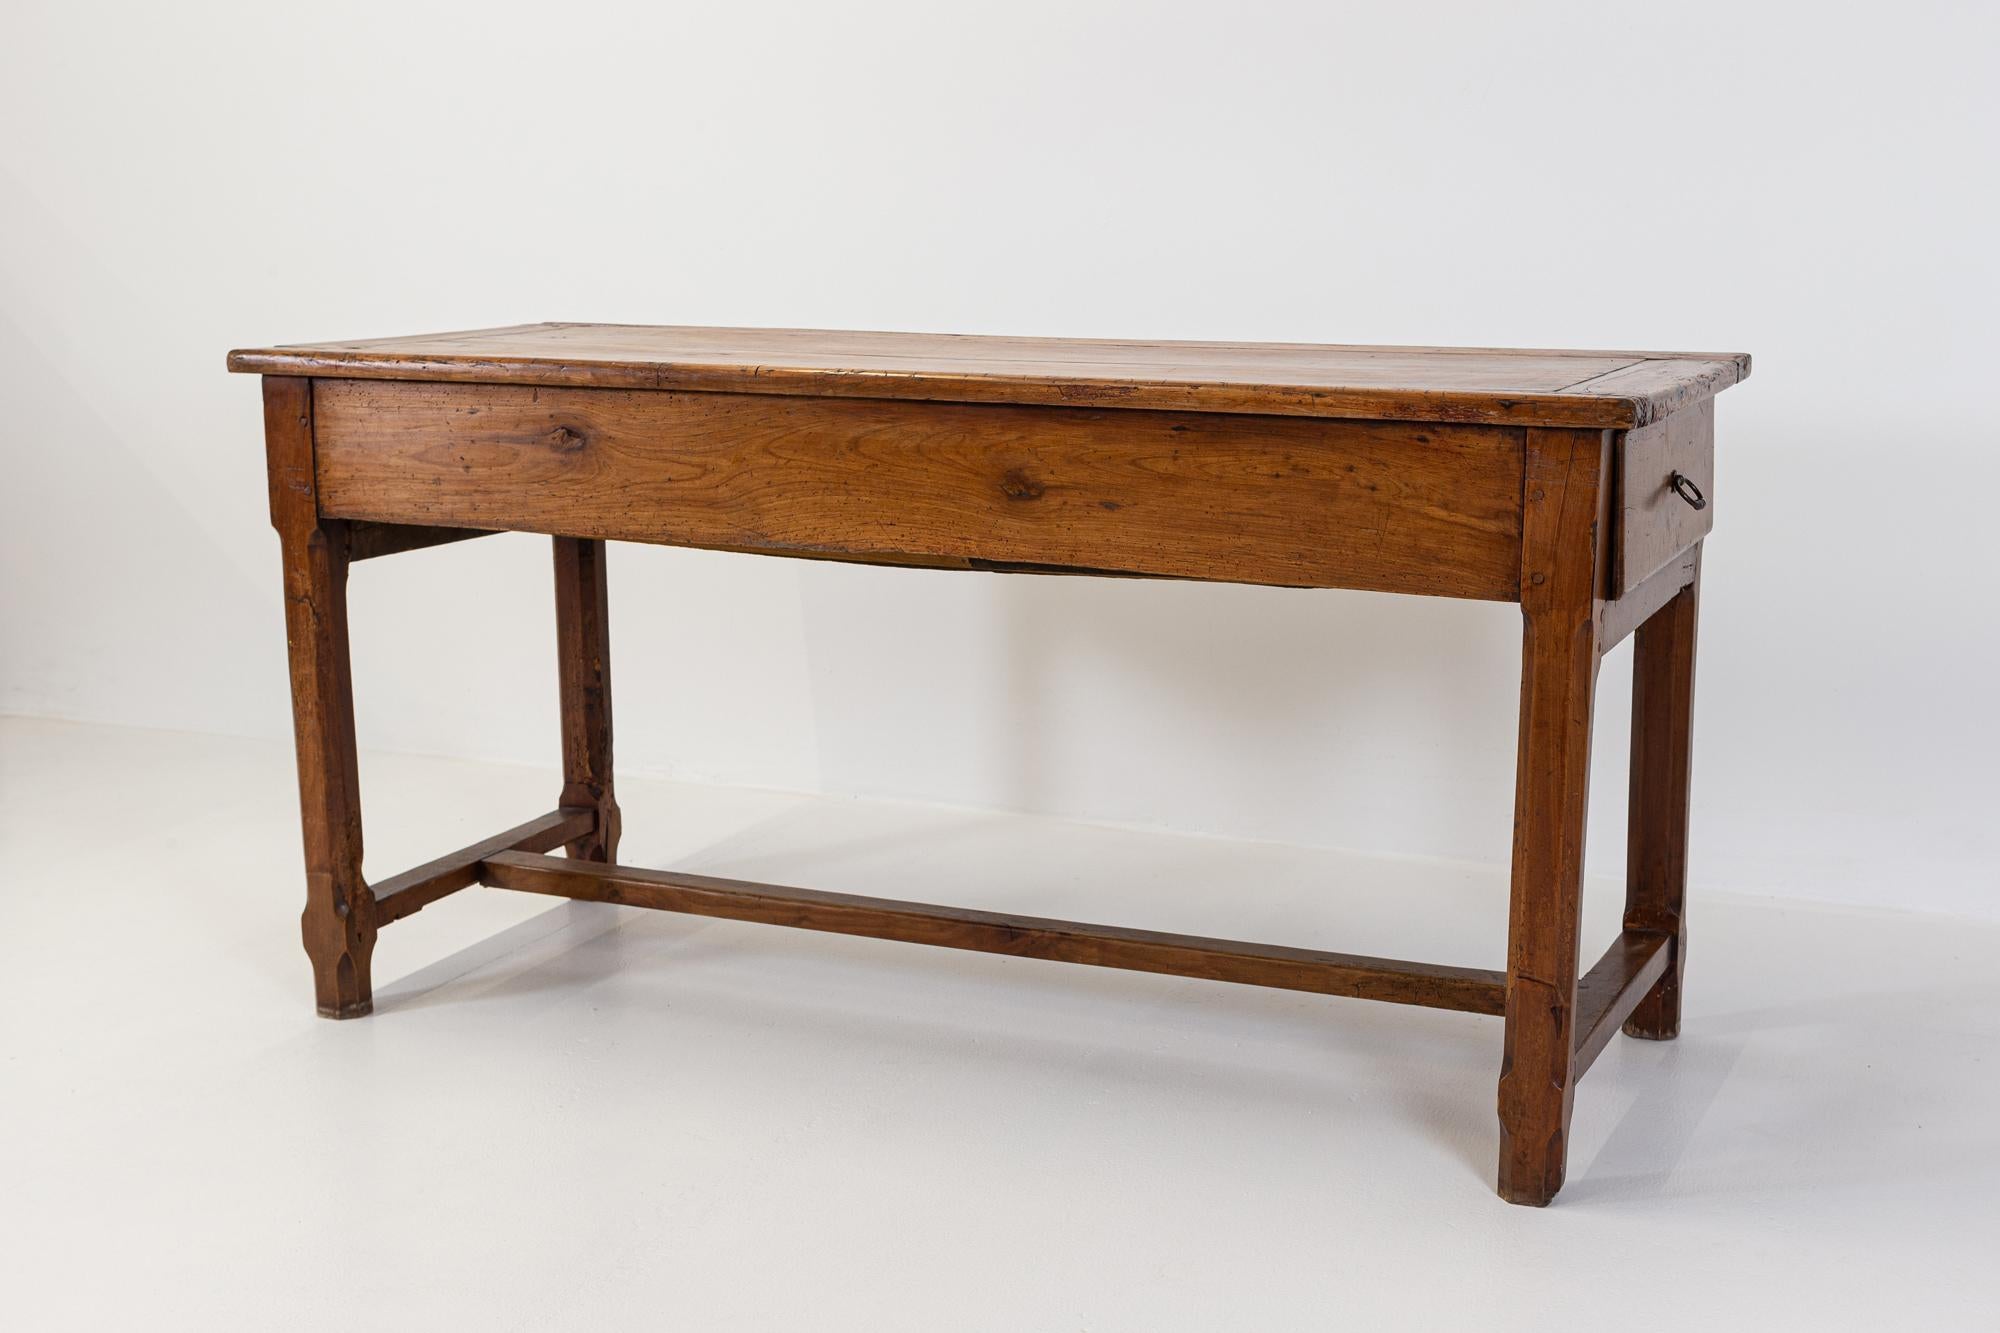 Circa 1810.

19thC French fruitwood farmhouse table

H stretcher, two end drawers with chamfered and pegged legs

Sourced from the South of France

(Signs of past leg repairs)

Measures: W 162 x D 68 x H 80 cm.
 
 